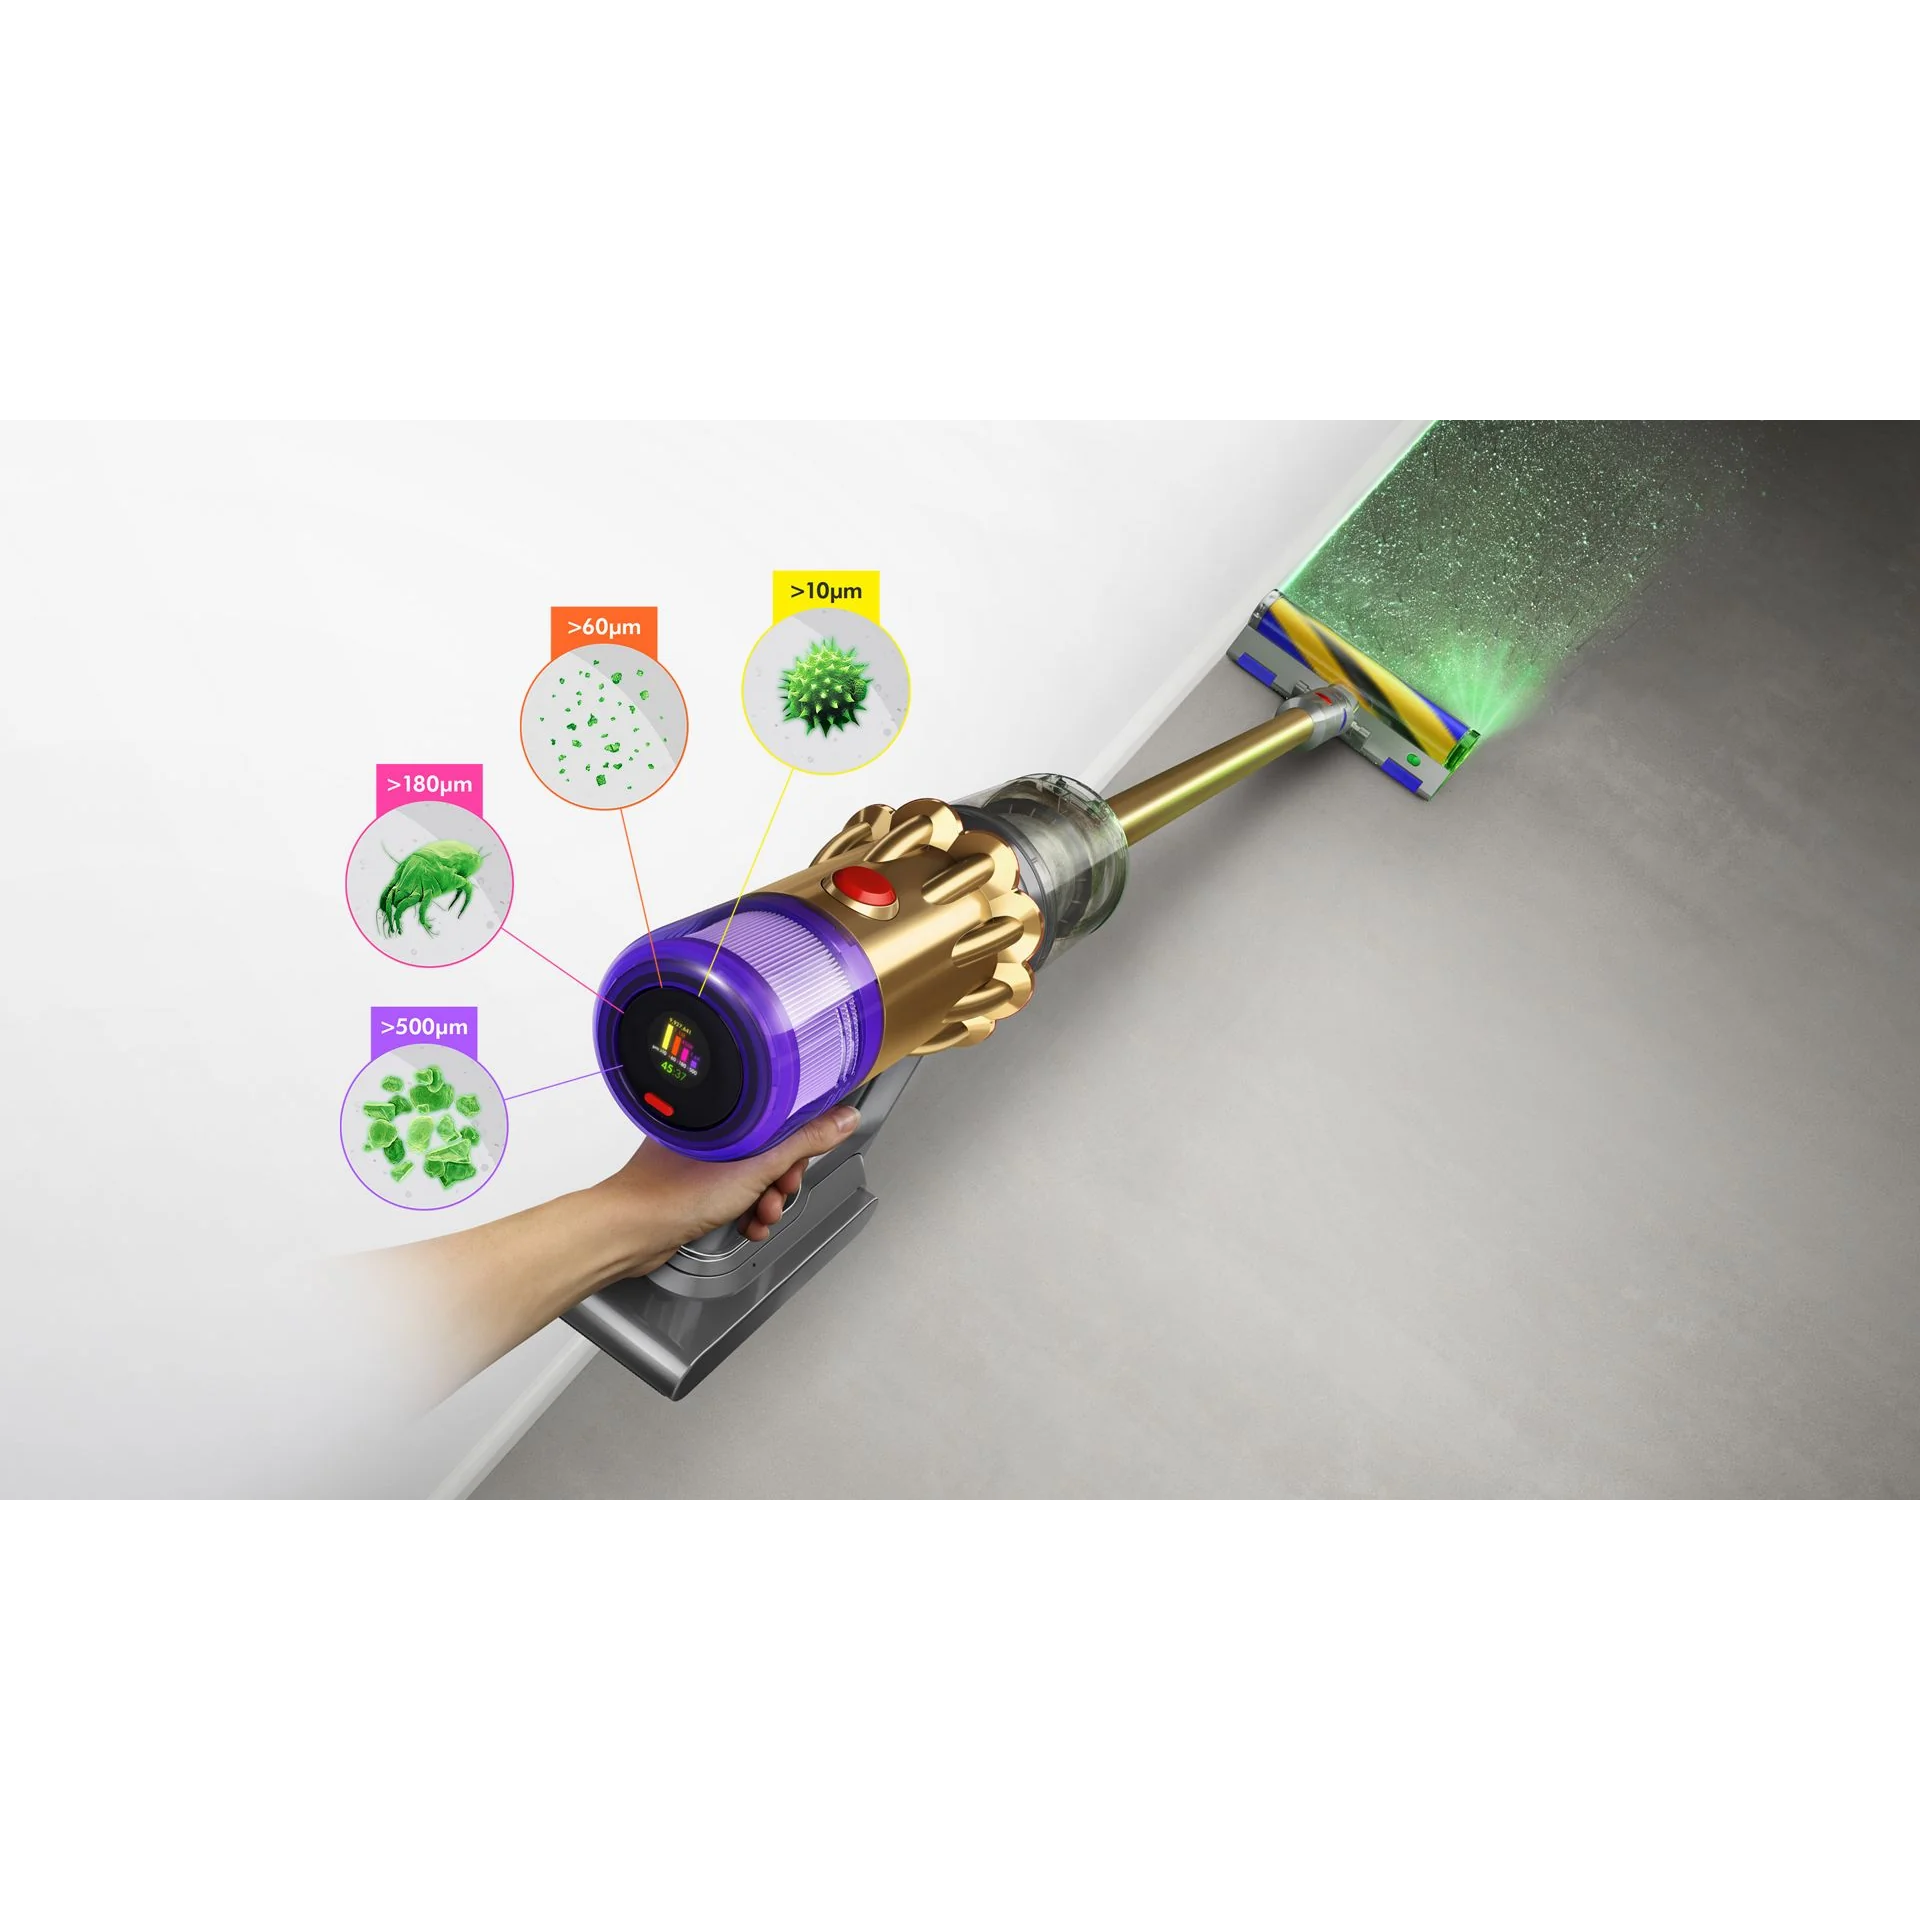 Dyson V12 Detect Slim Absolute Cordless Vacuum Cleaner - Gold Dyson